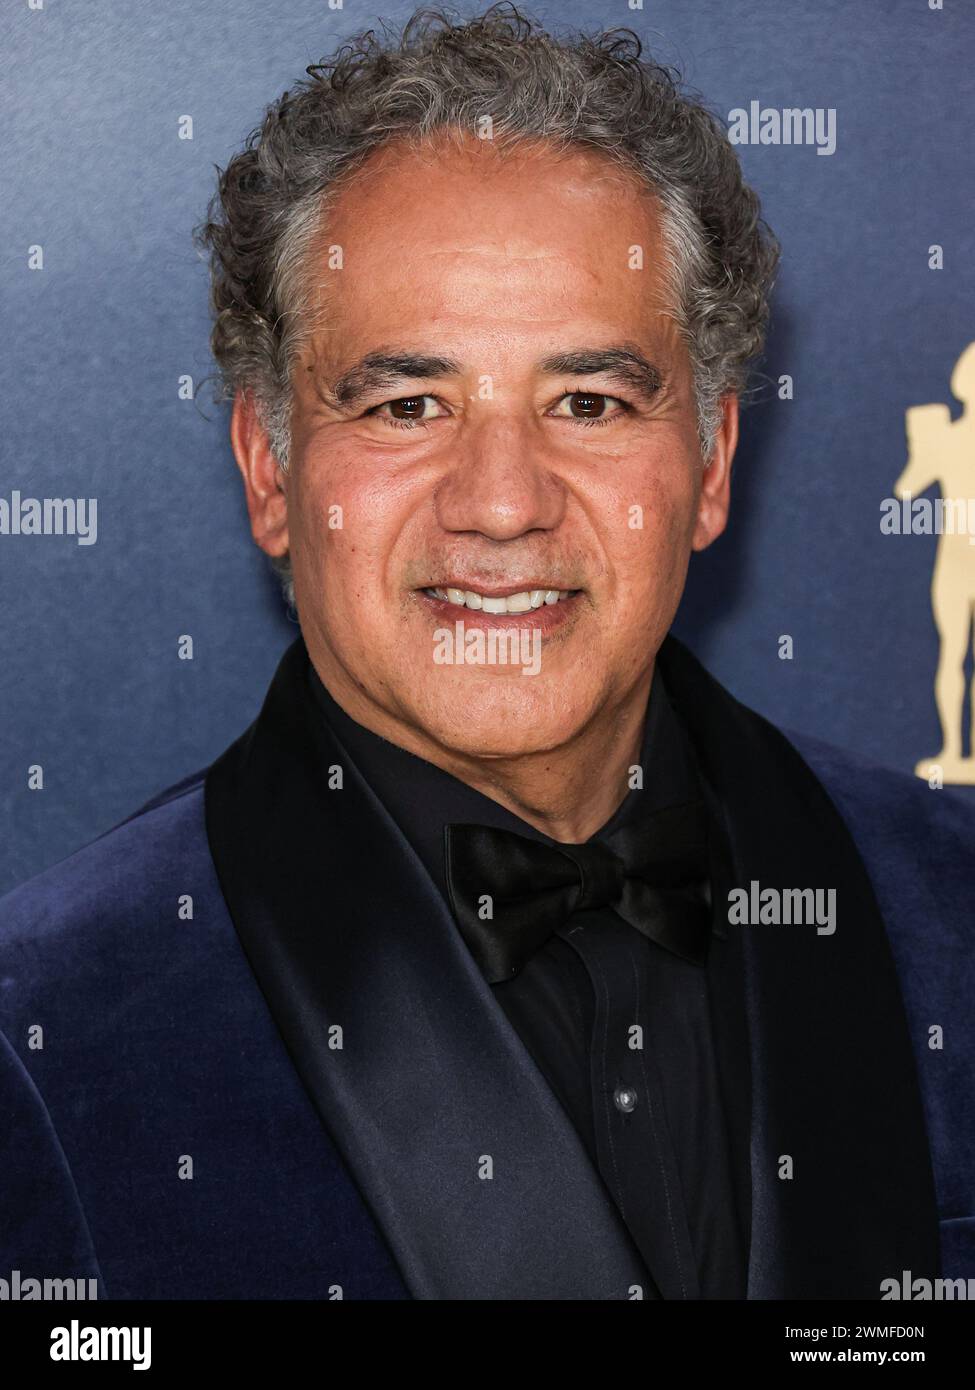 LOS ANGELES, CALIFORNIA, USA - FEBRUARY 24: John Ortiz arrives at the 30th Annual Screen Actors Guild Awards held at the Shrine Auditorium and Expo Hall on February 24, 2024 in Los Angeles, California, United States. (Photo by Xavier Collin/Image Press Agency) Stock Photo